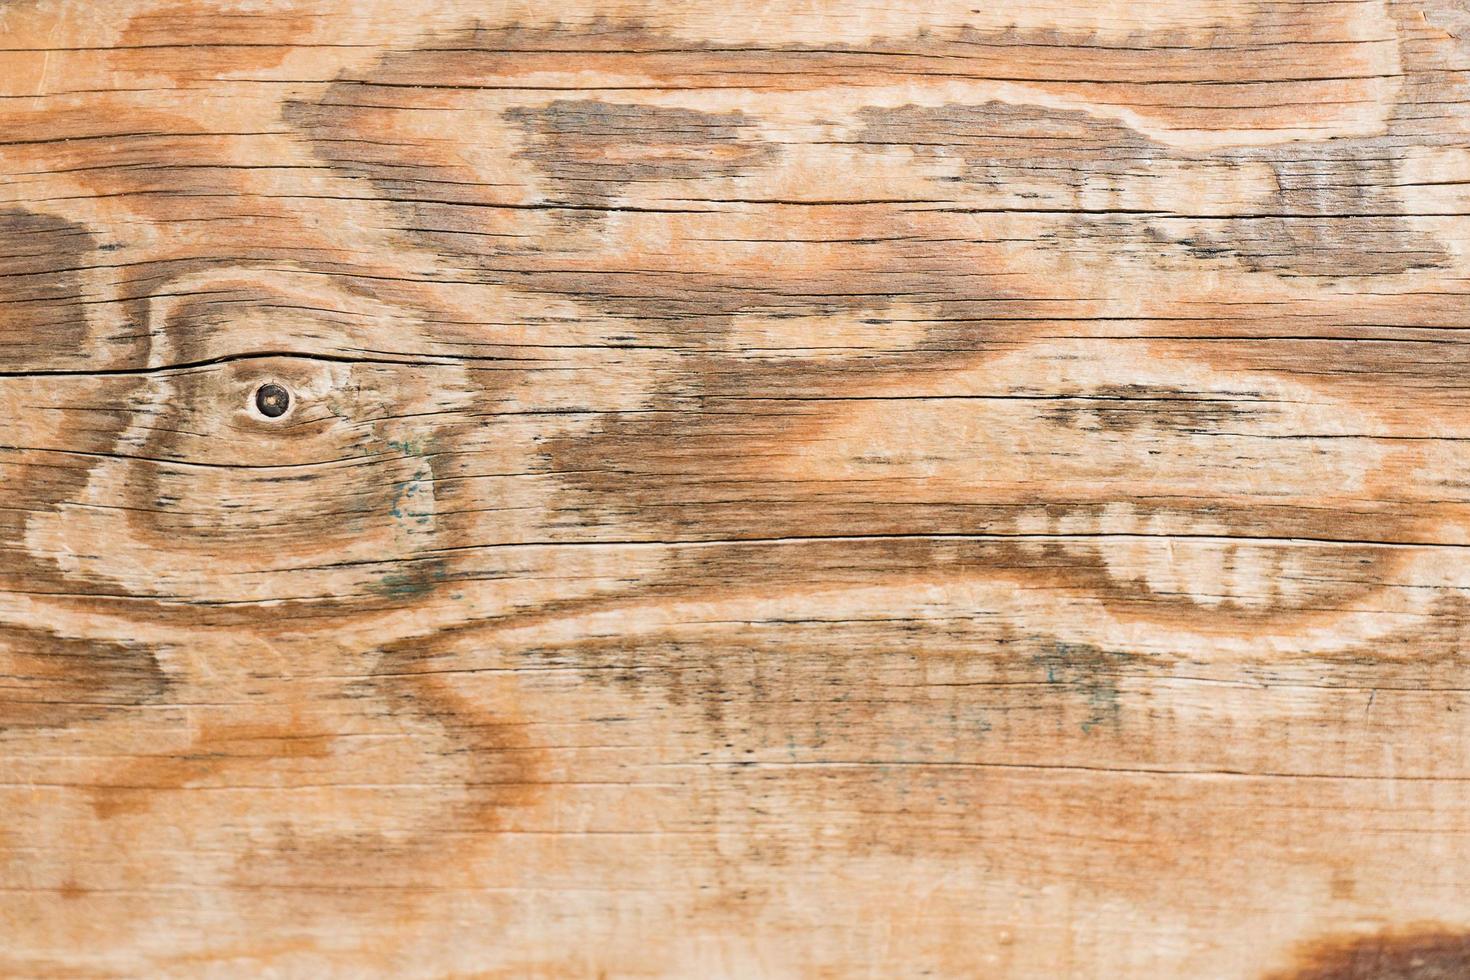 textured background of wooden log. close up photo